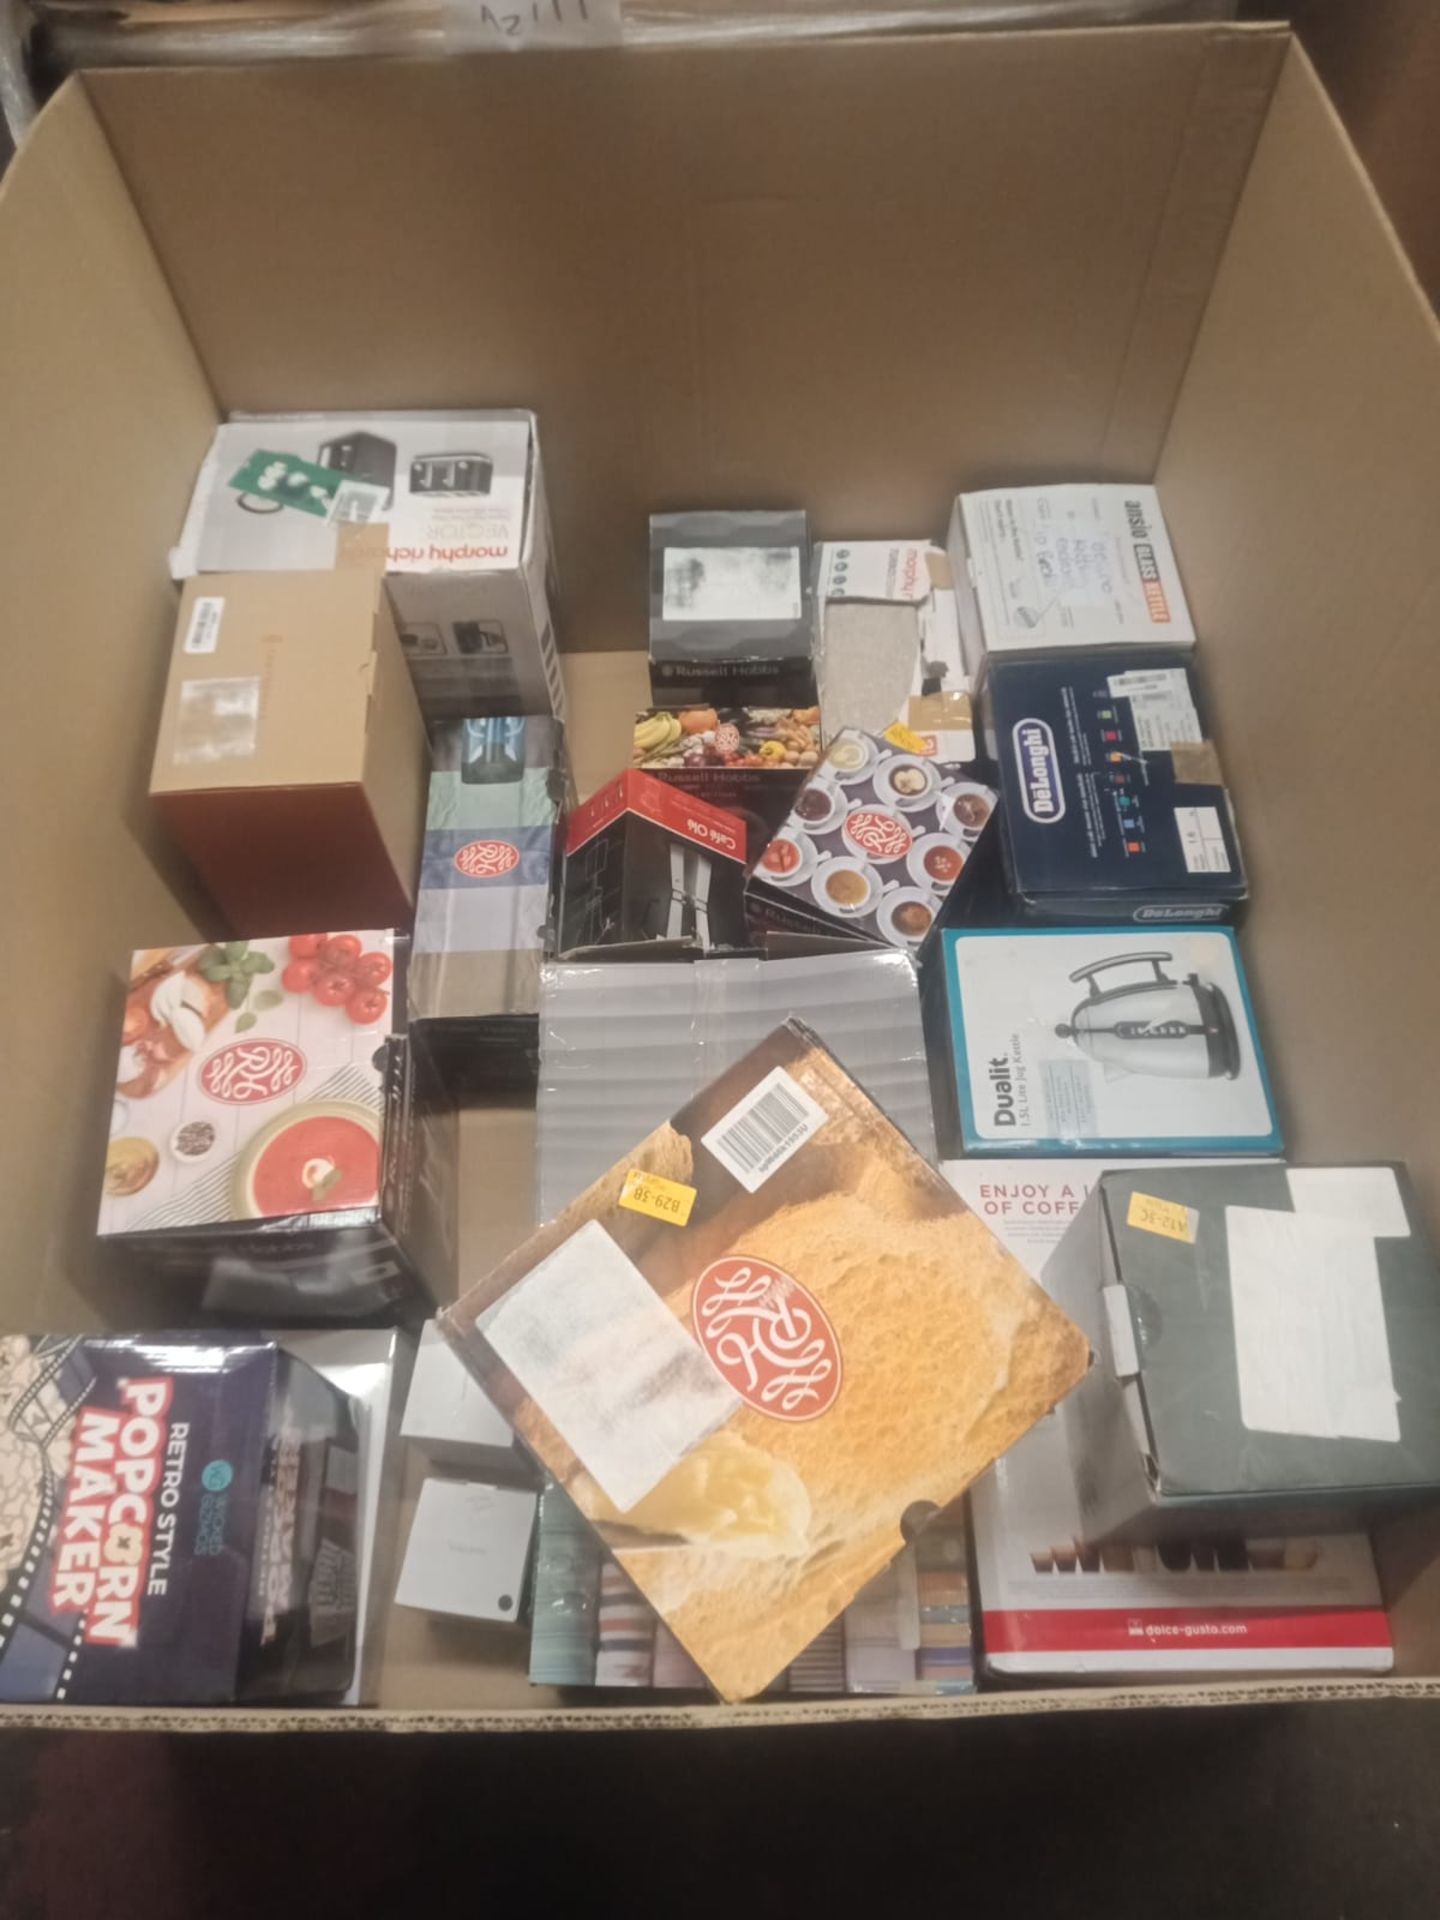 JOB LOT OF VARIOUS ELECTRONICS - WHICH INCLUDE, RUSSELL HOBBS IRON, POPCORN MAKER, TOASTER, BLENDER - Image 15 of 19